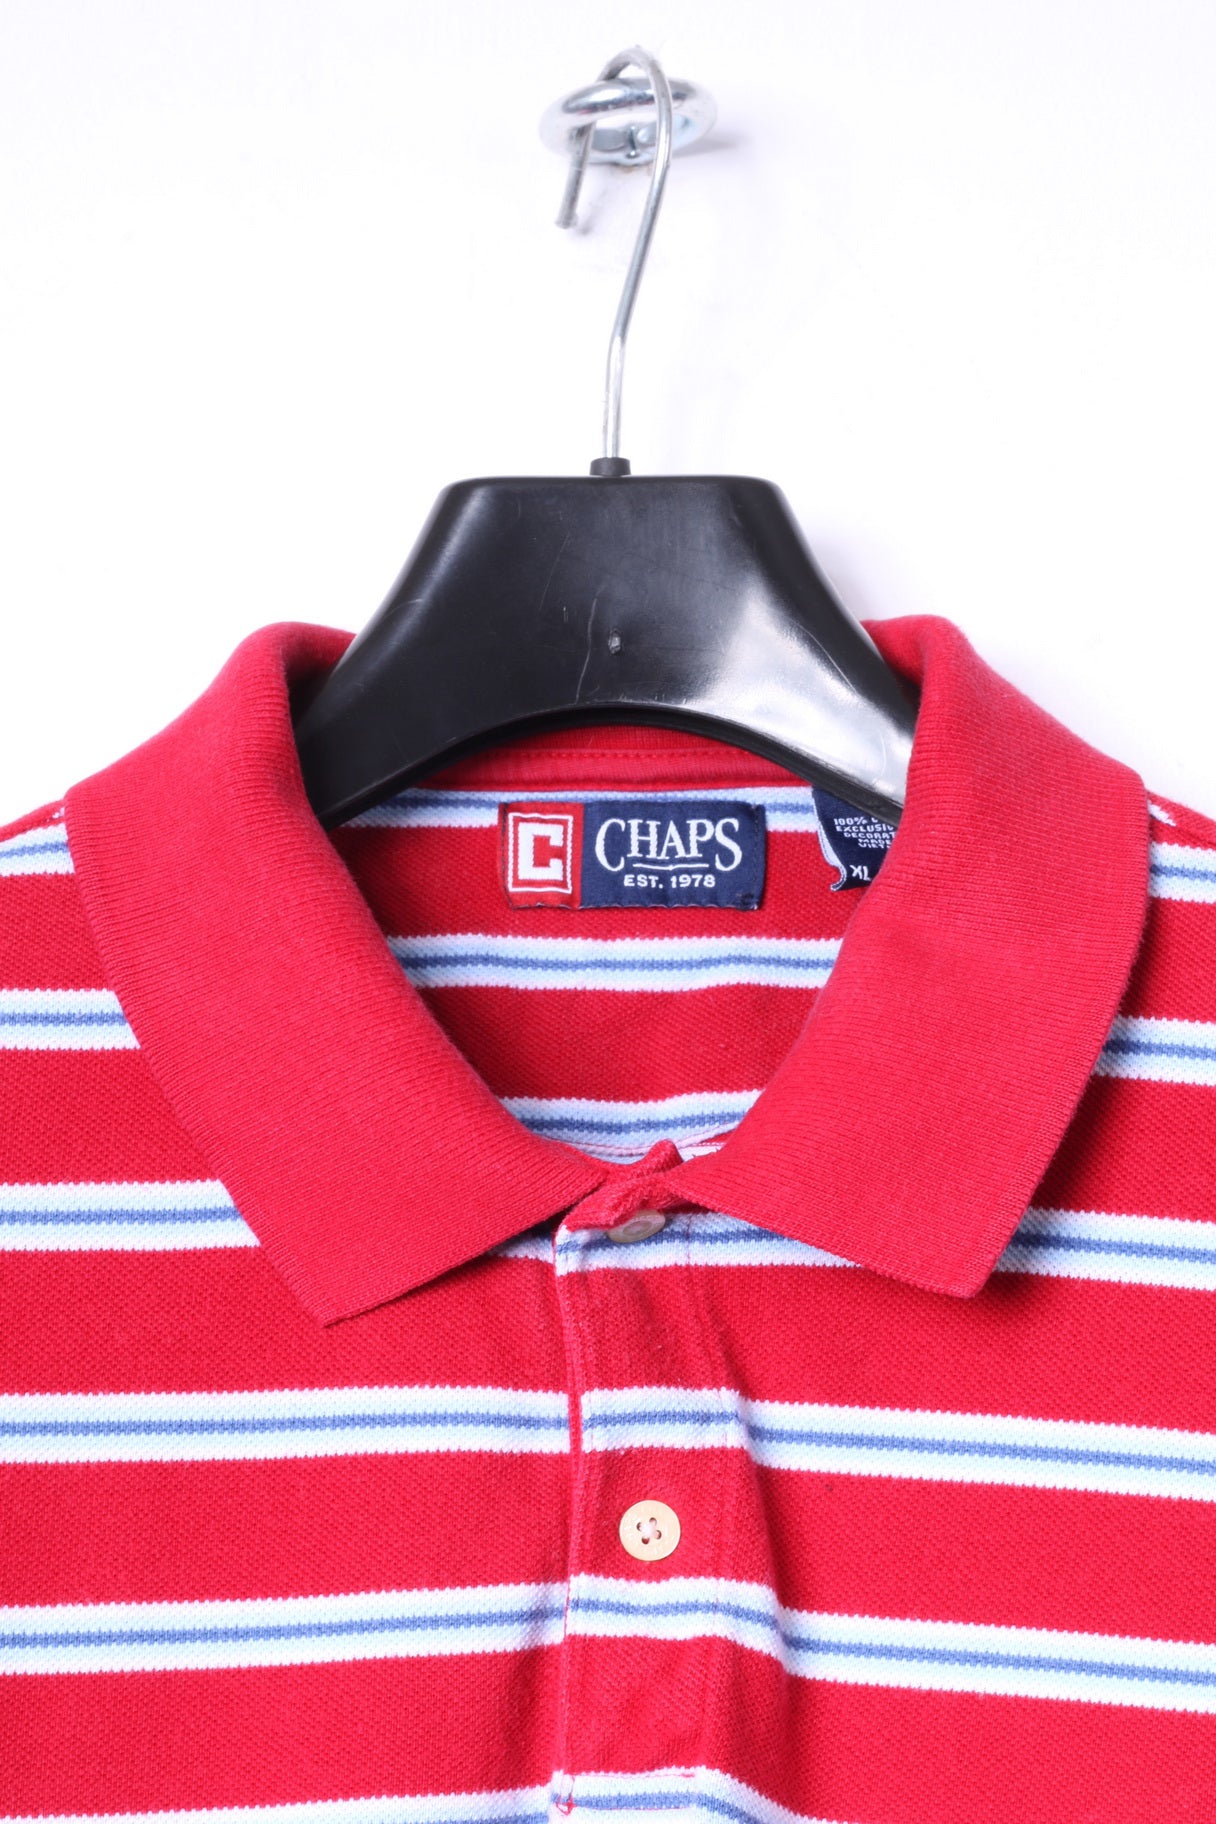 CHAPS Men XL Polo Shirt Red Cotton Striped Detailed Buttons Classic Top